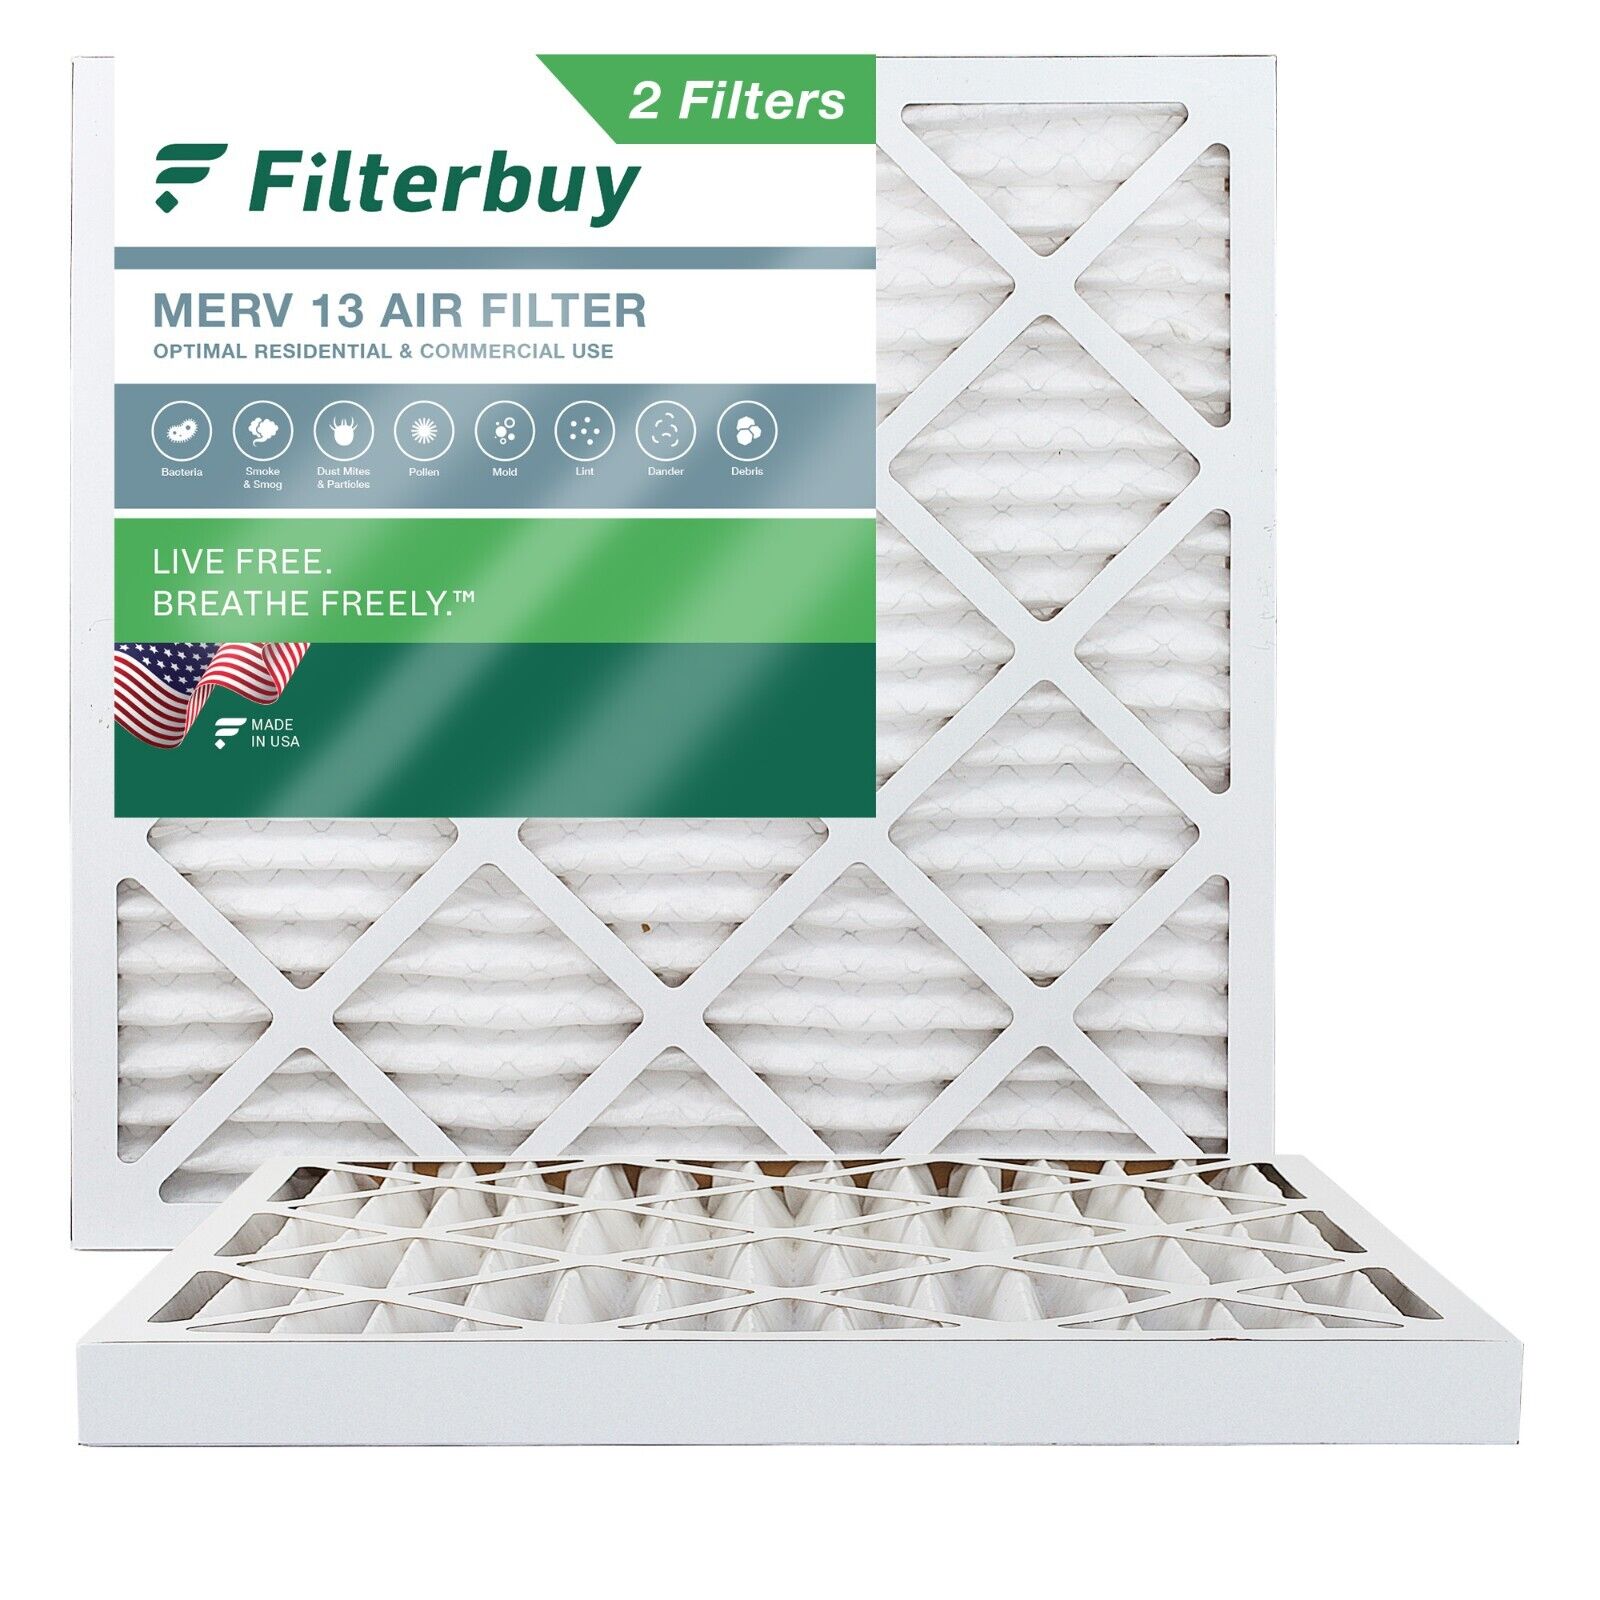 Filterbuy 20x20x2 Pleated Air Filters, Replacement for HVAC AC Furnace (MERV 13)